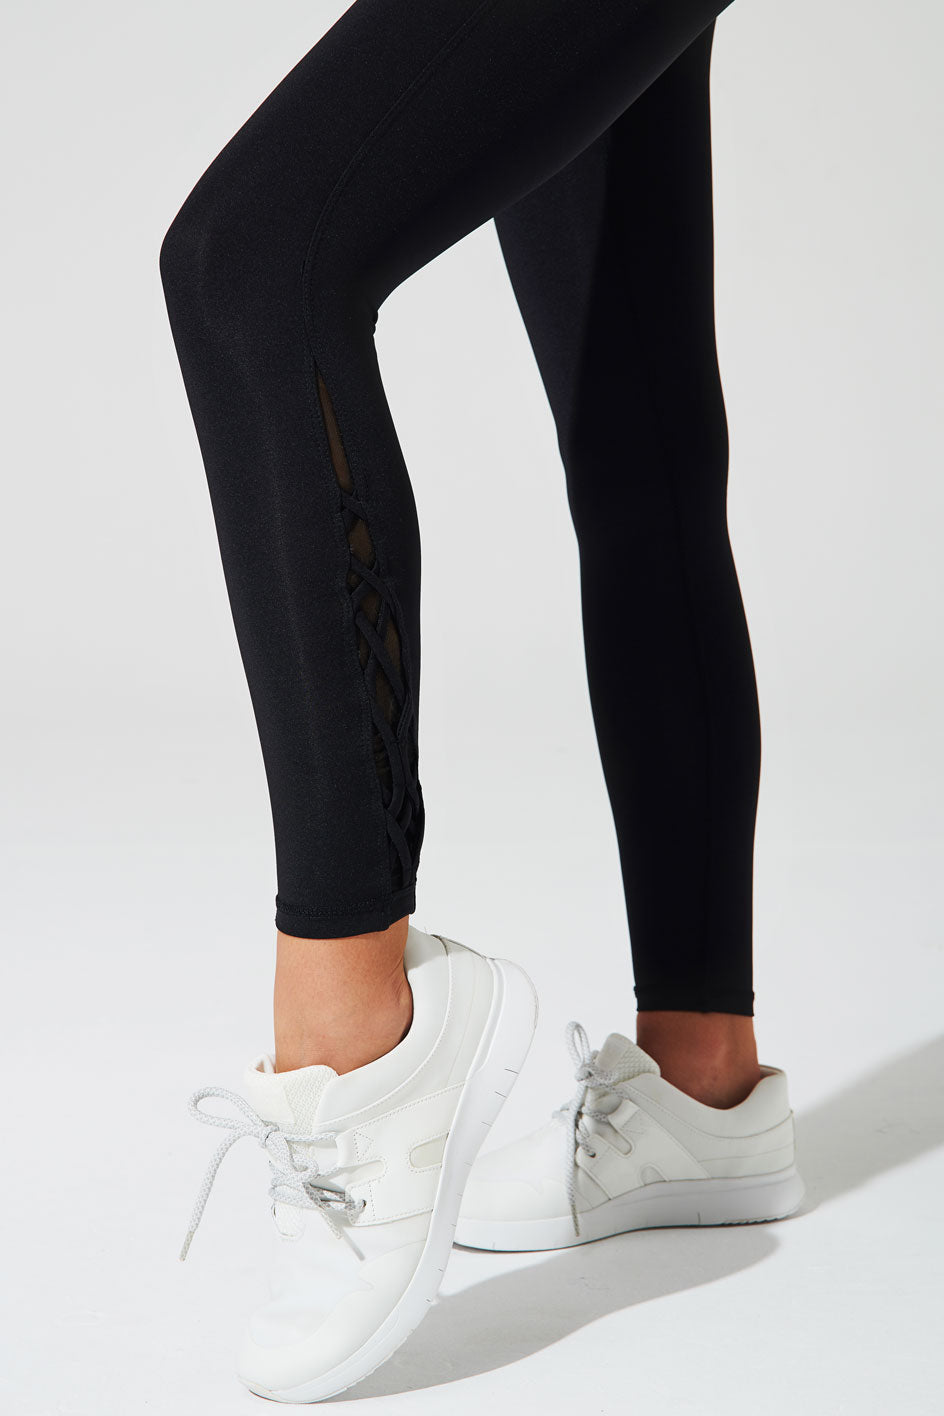 Stylish black high-waist leggings for women, perfect for a trendy and comfortable look.